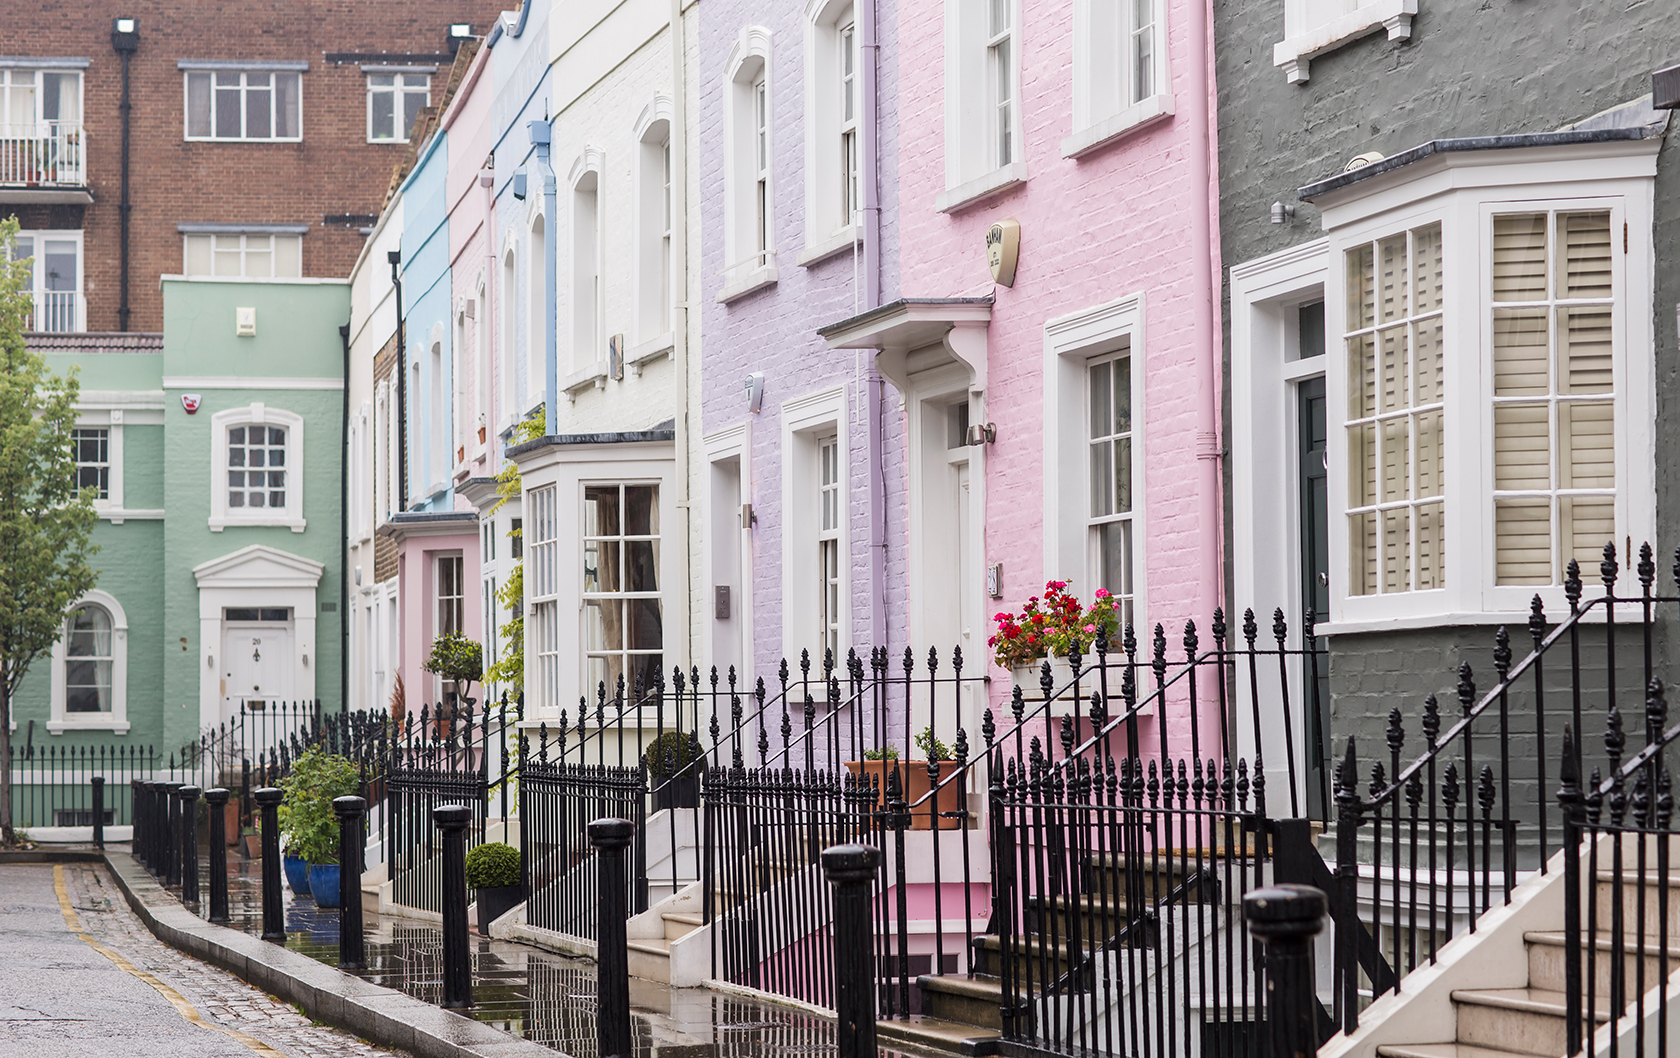 London Property Market Update – Now is the Time to Buy!